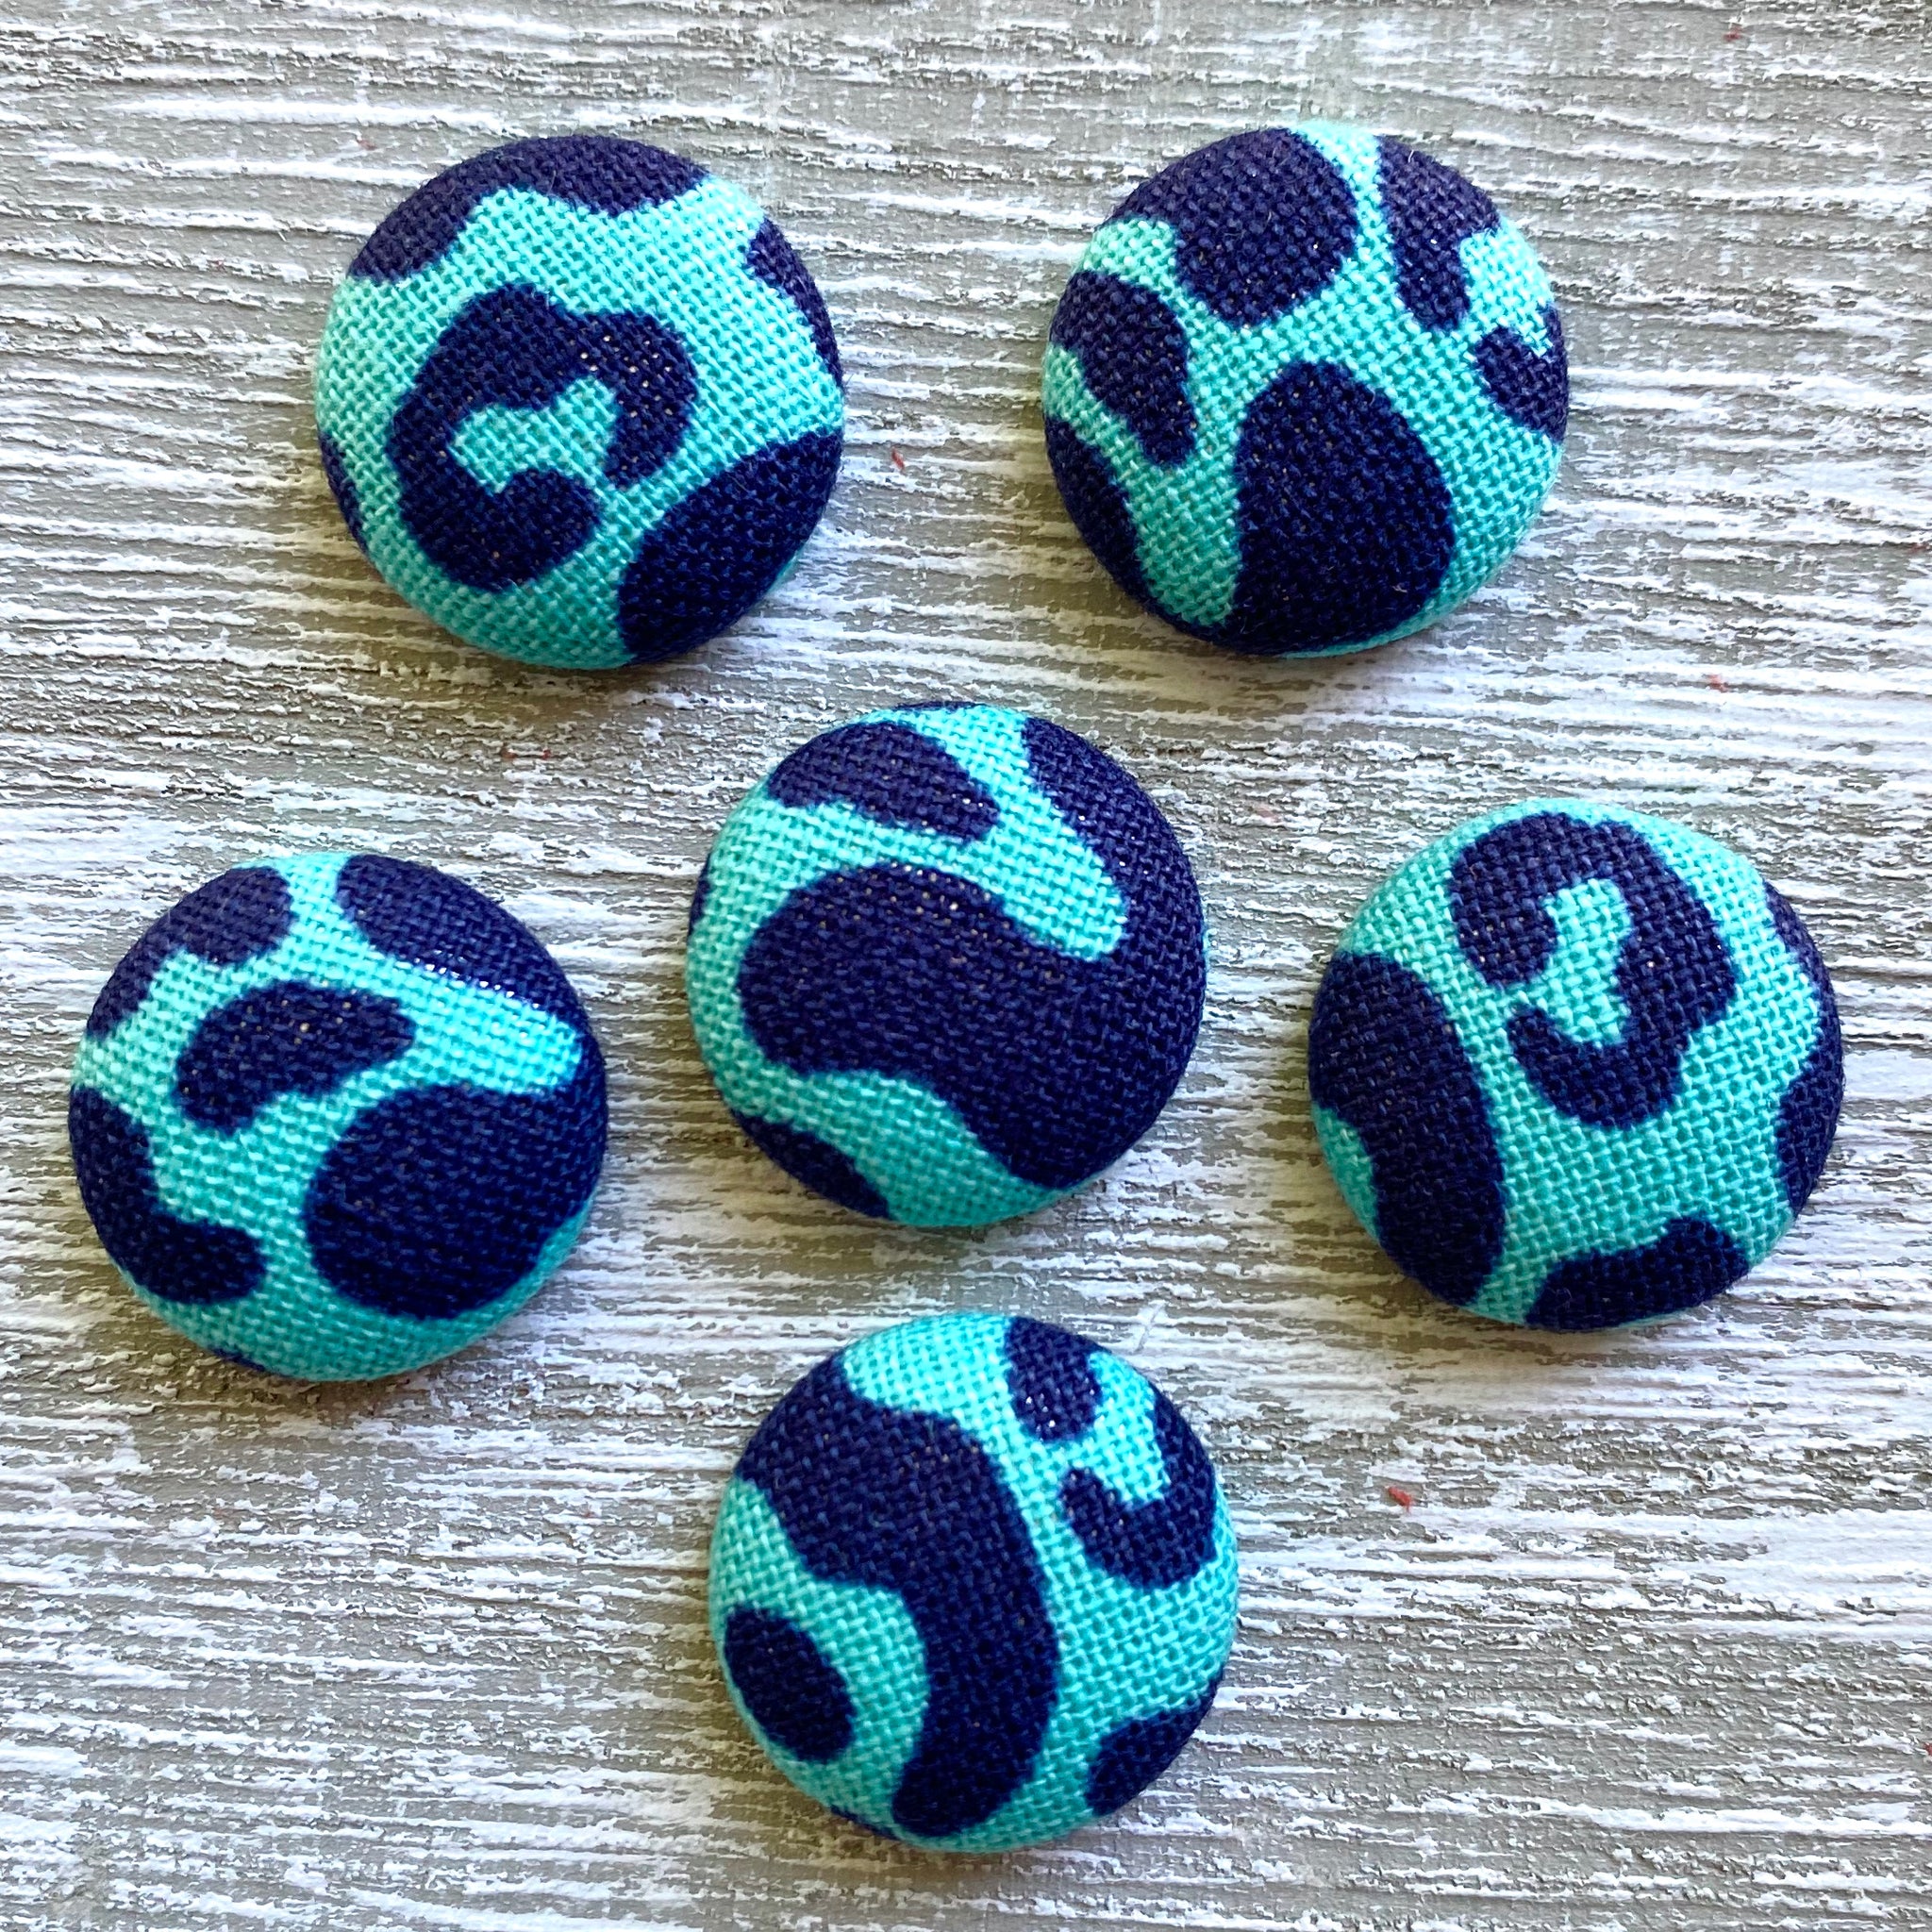 Teal & Navy Leopard Fabric Button Earrings